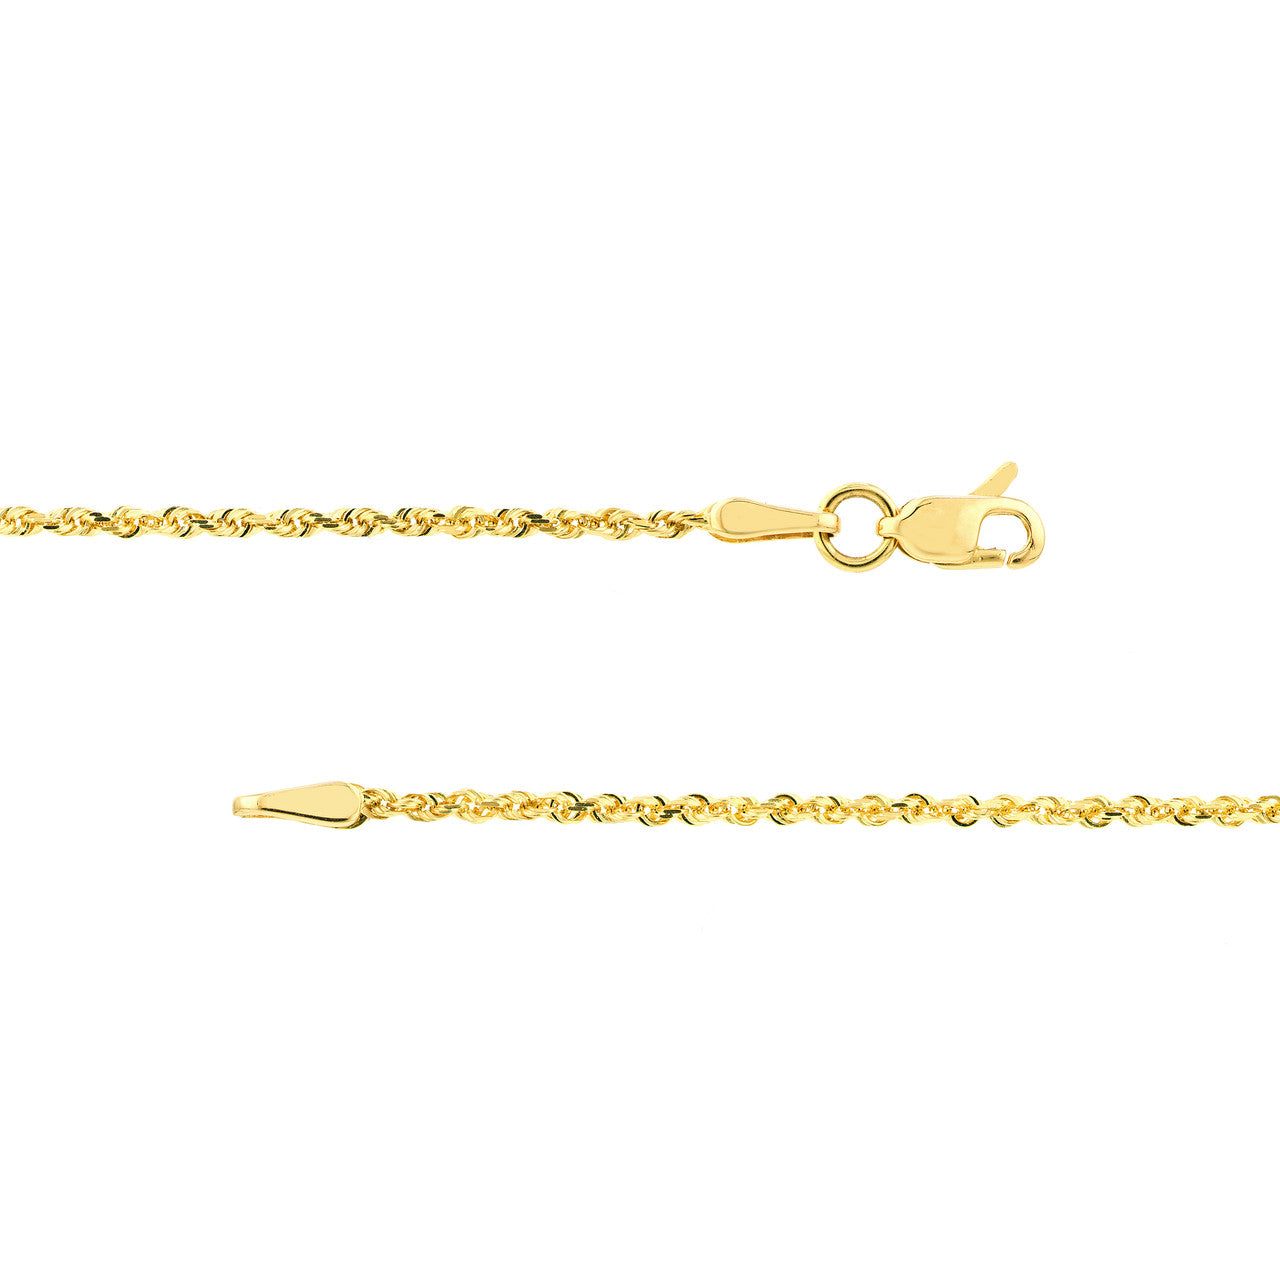 14K Yellow Gold 1.50mm Solid Diamond Cut Rope Chain with Lobster Lock